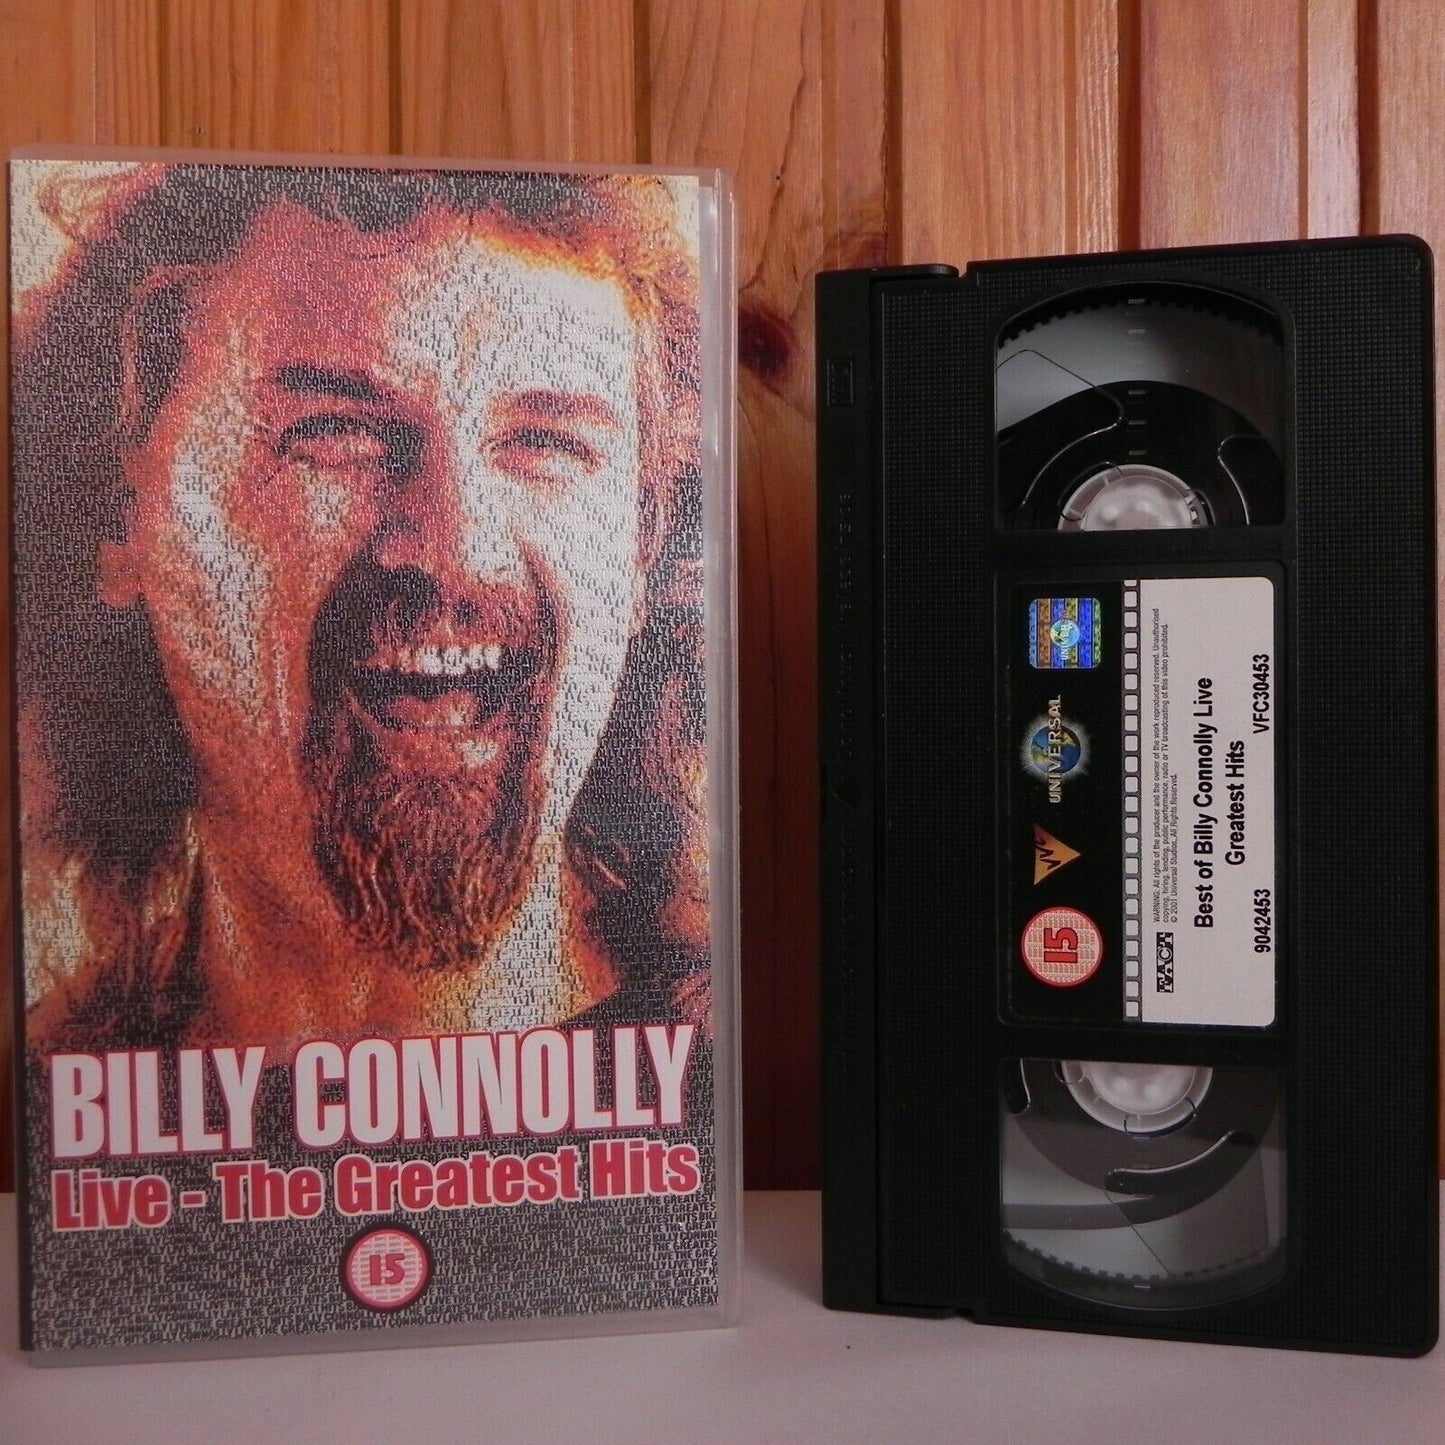 Billy Connolly: Live -The Greatest Hits - Stand-Up - British Comedian - Pal VHS-